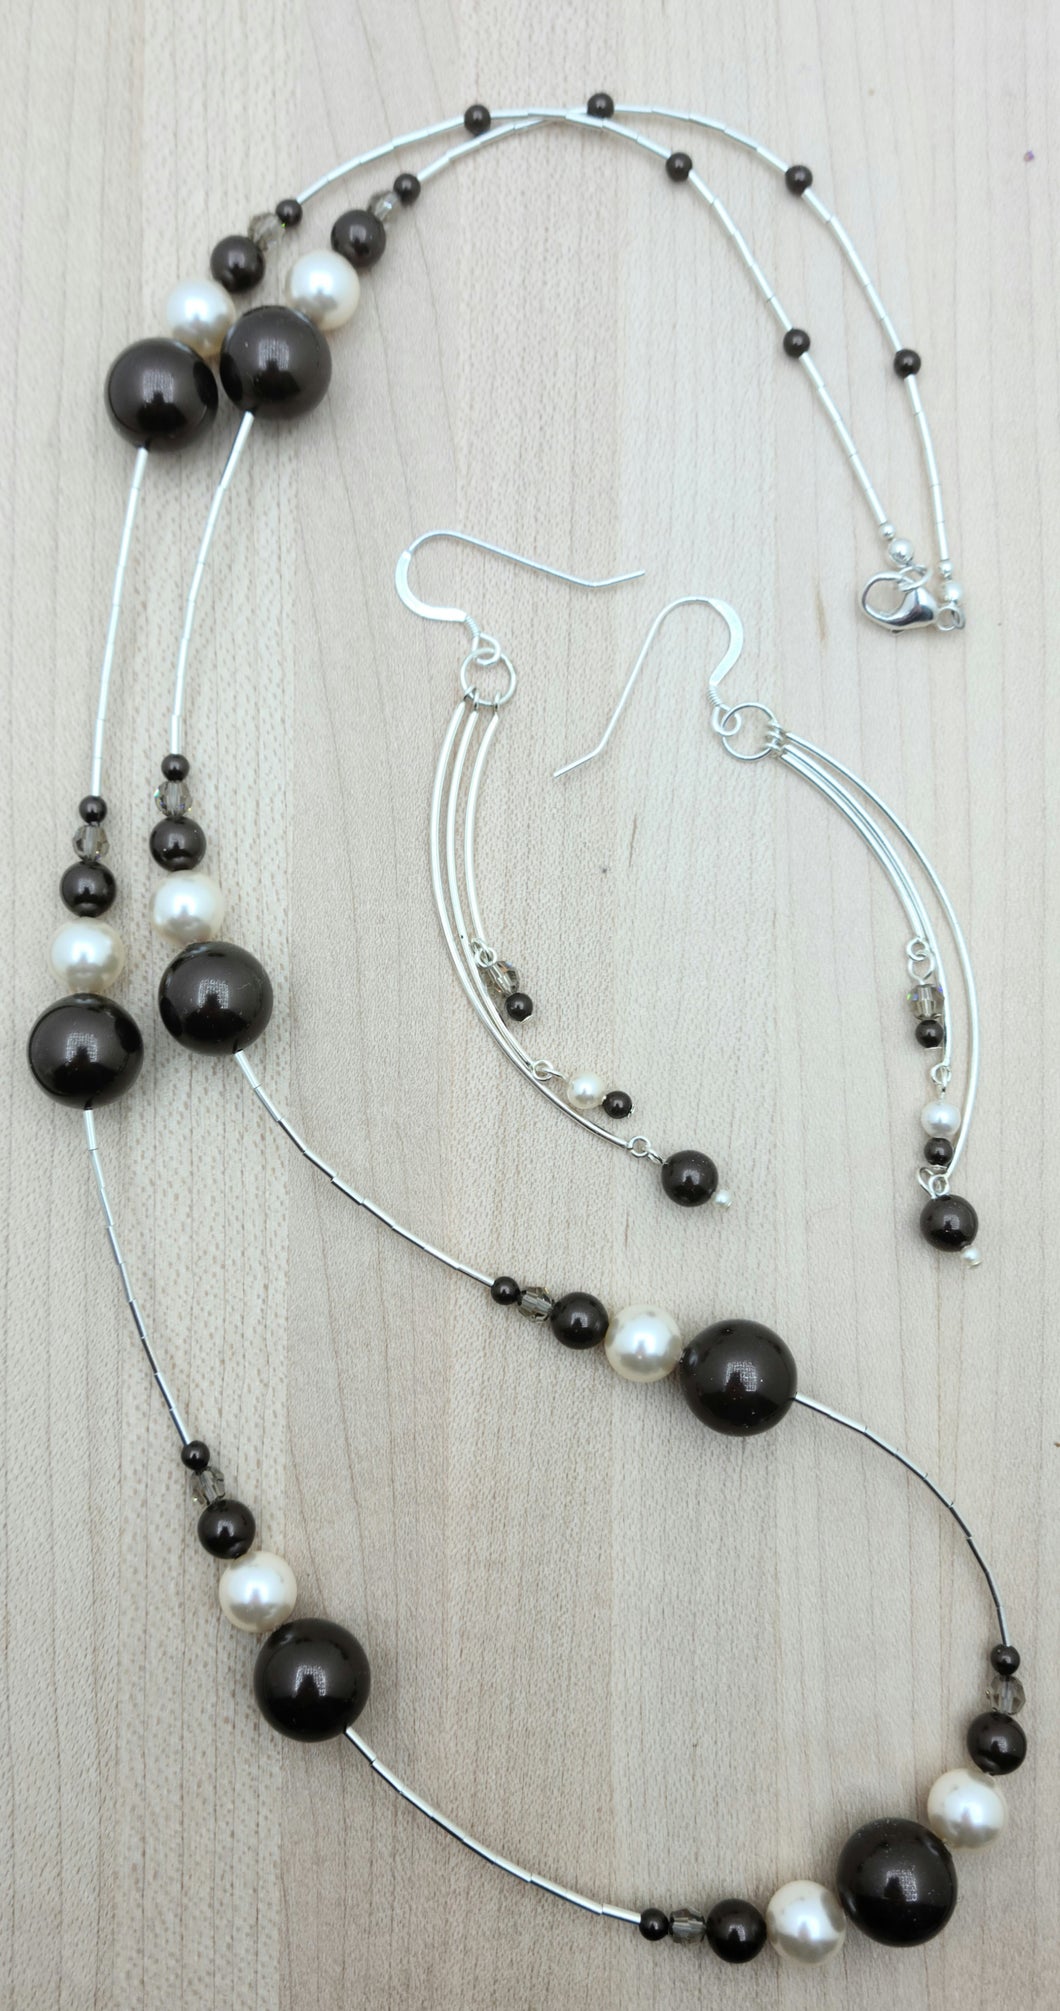 Chocolate & cream are the enticing stars in this necklace/earring set! Liquid sterling silver separate groups of crystal pearls & crystals!